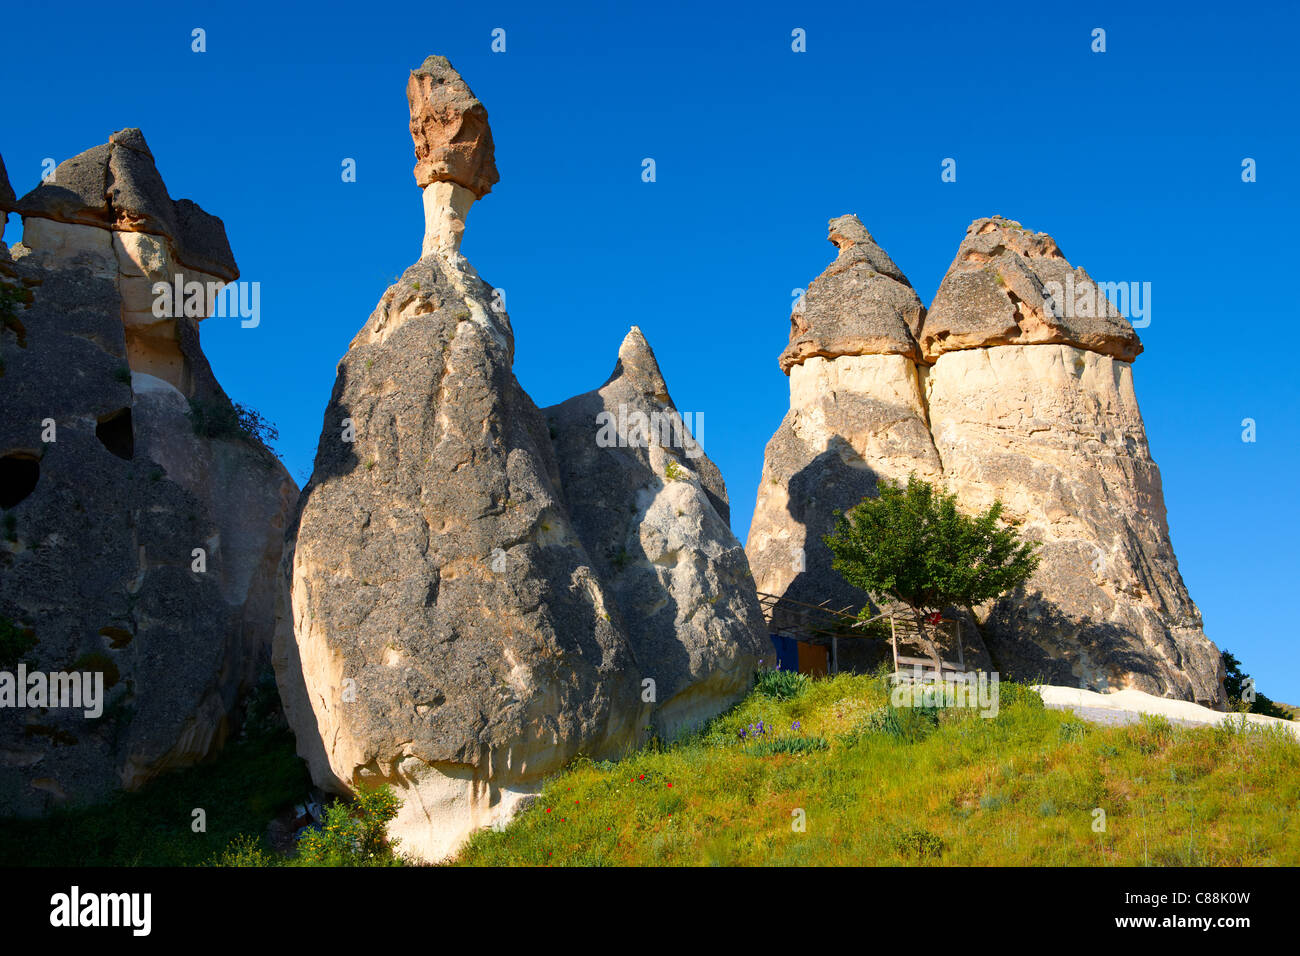 Pictures & images of the fairy chimney rock formations and rock pillars of “Pasabag Valley” near Goreme, Cappadocia, Nevsehir, Turkey Stock Photo